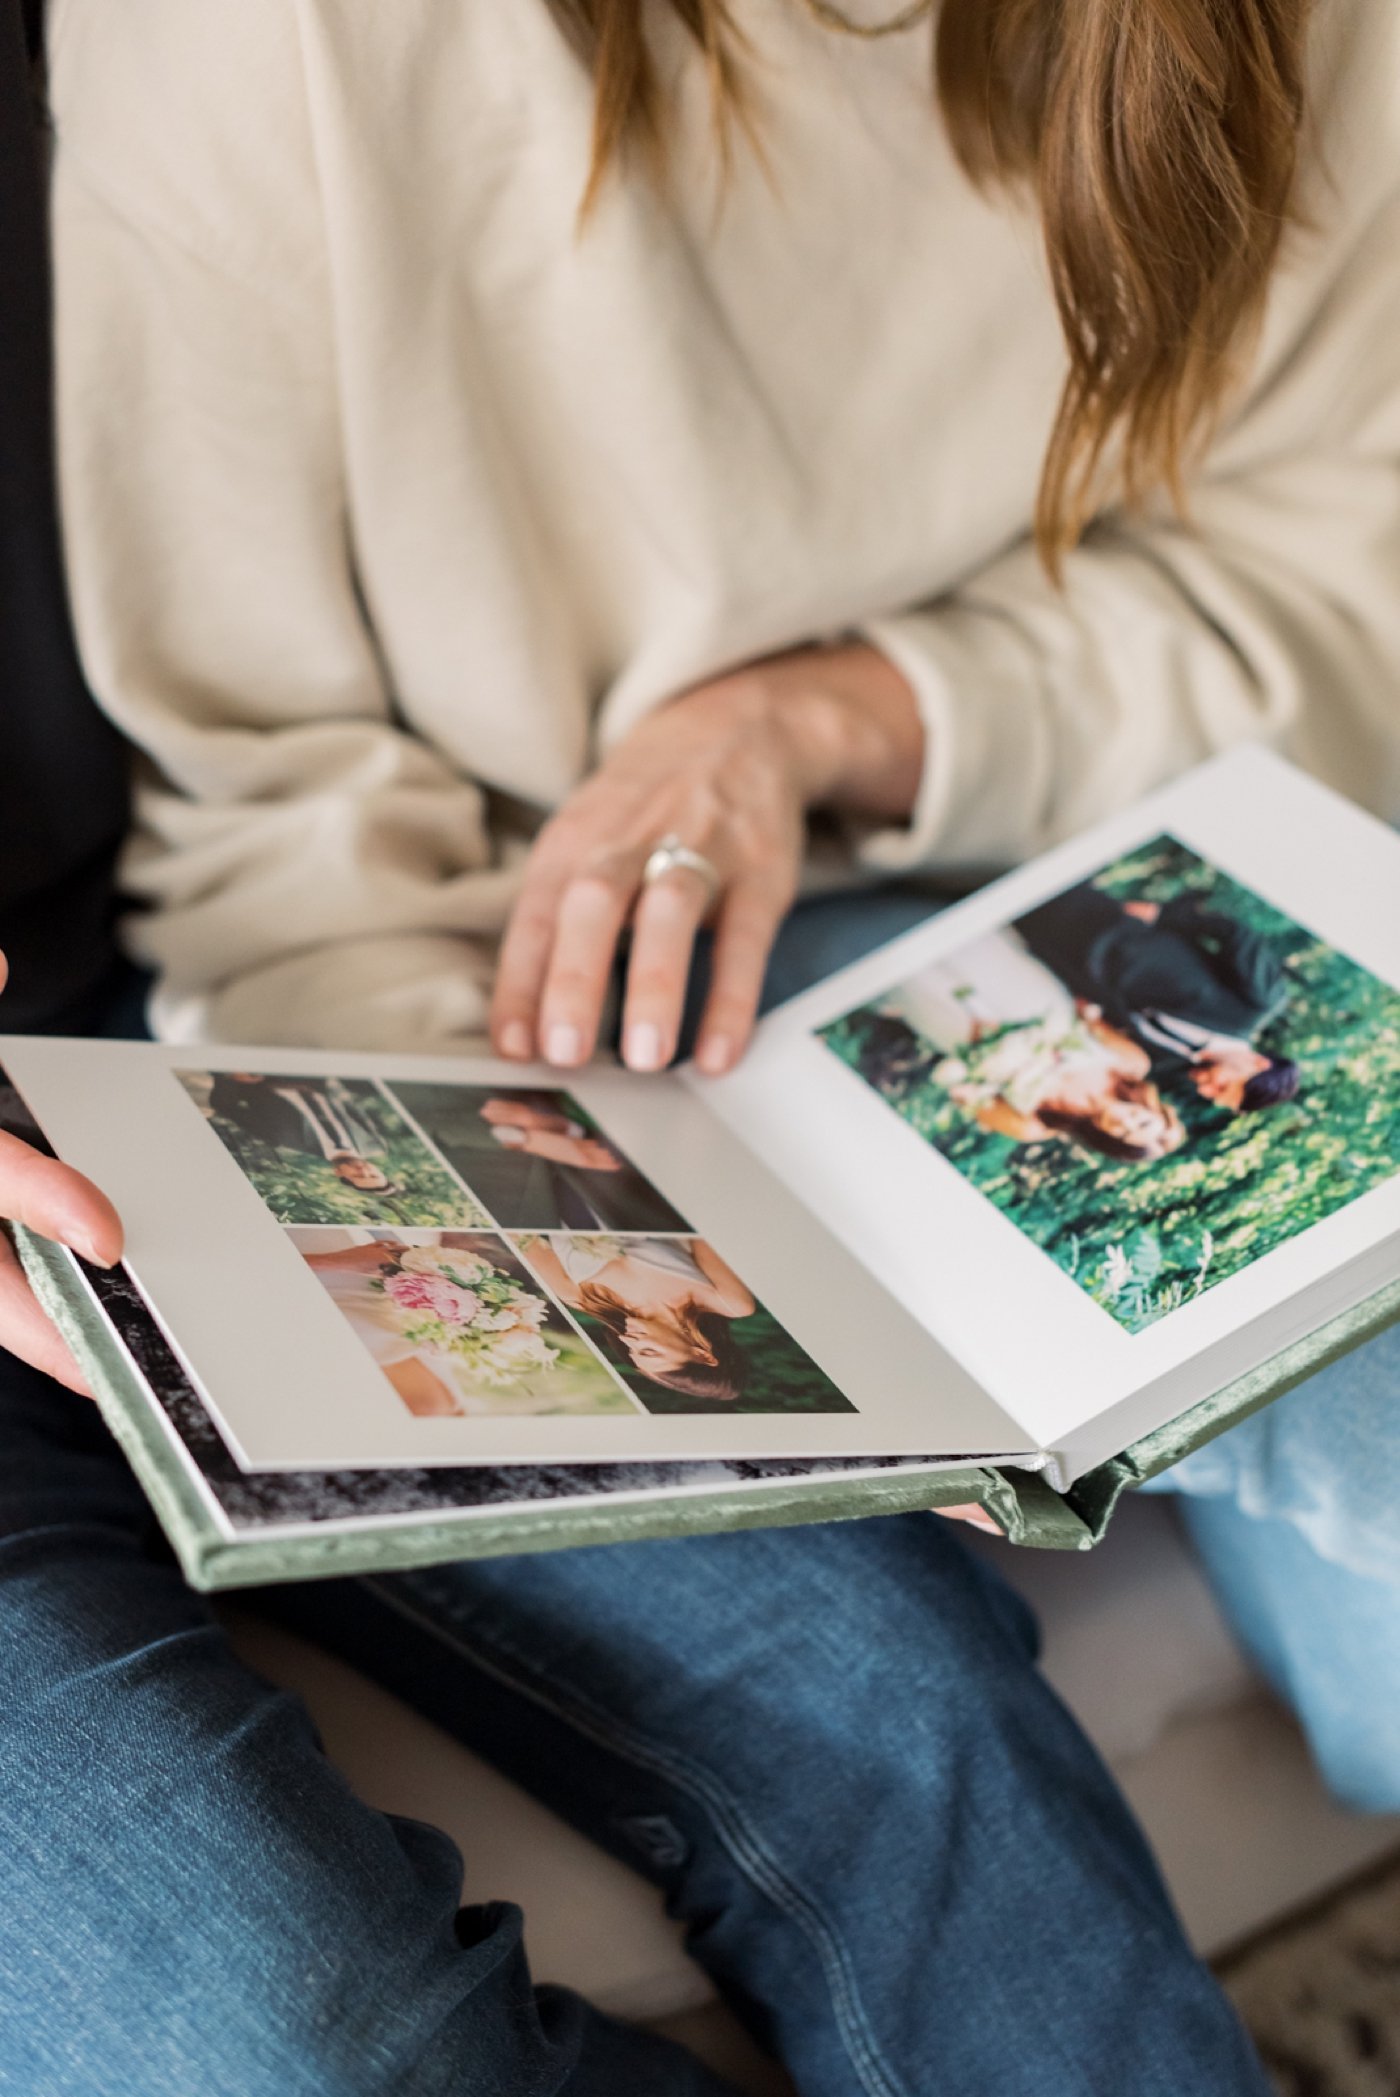 Why couples need a wedding album